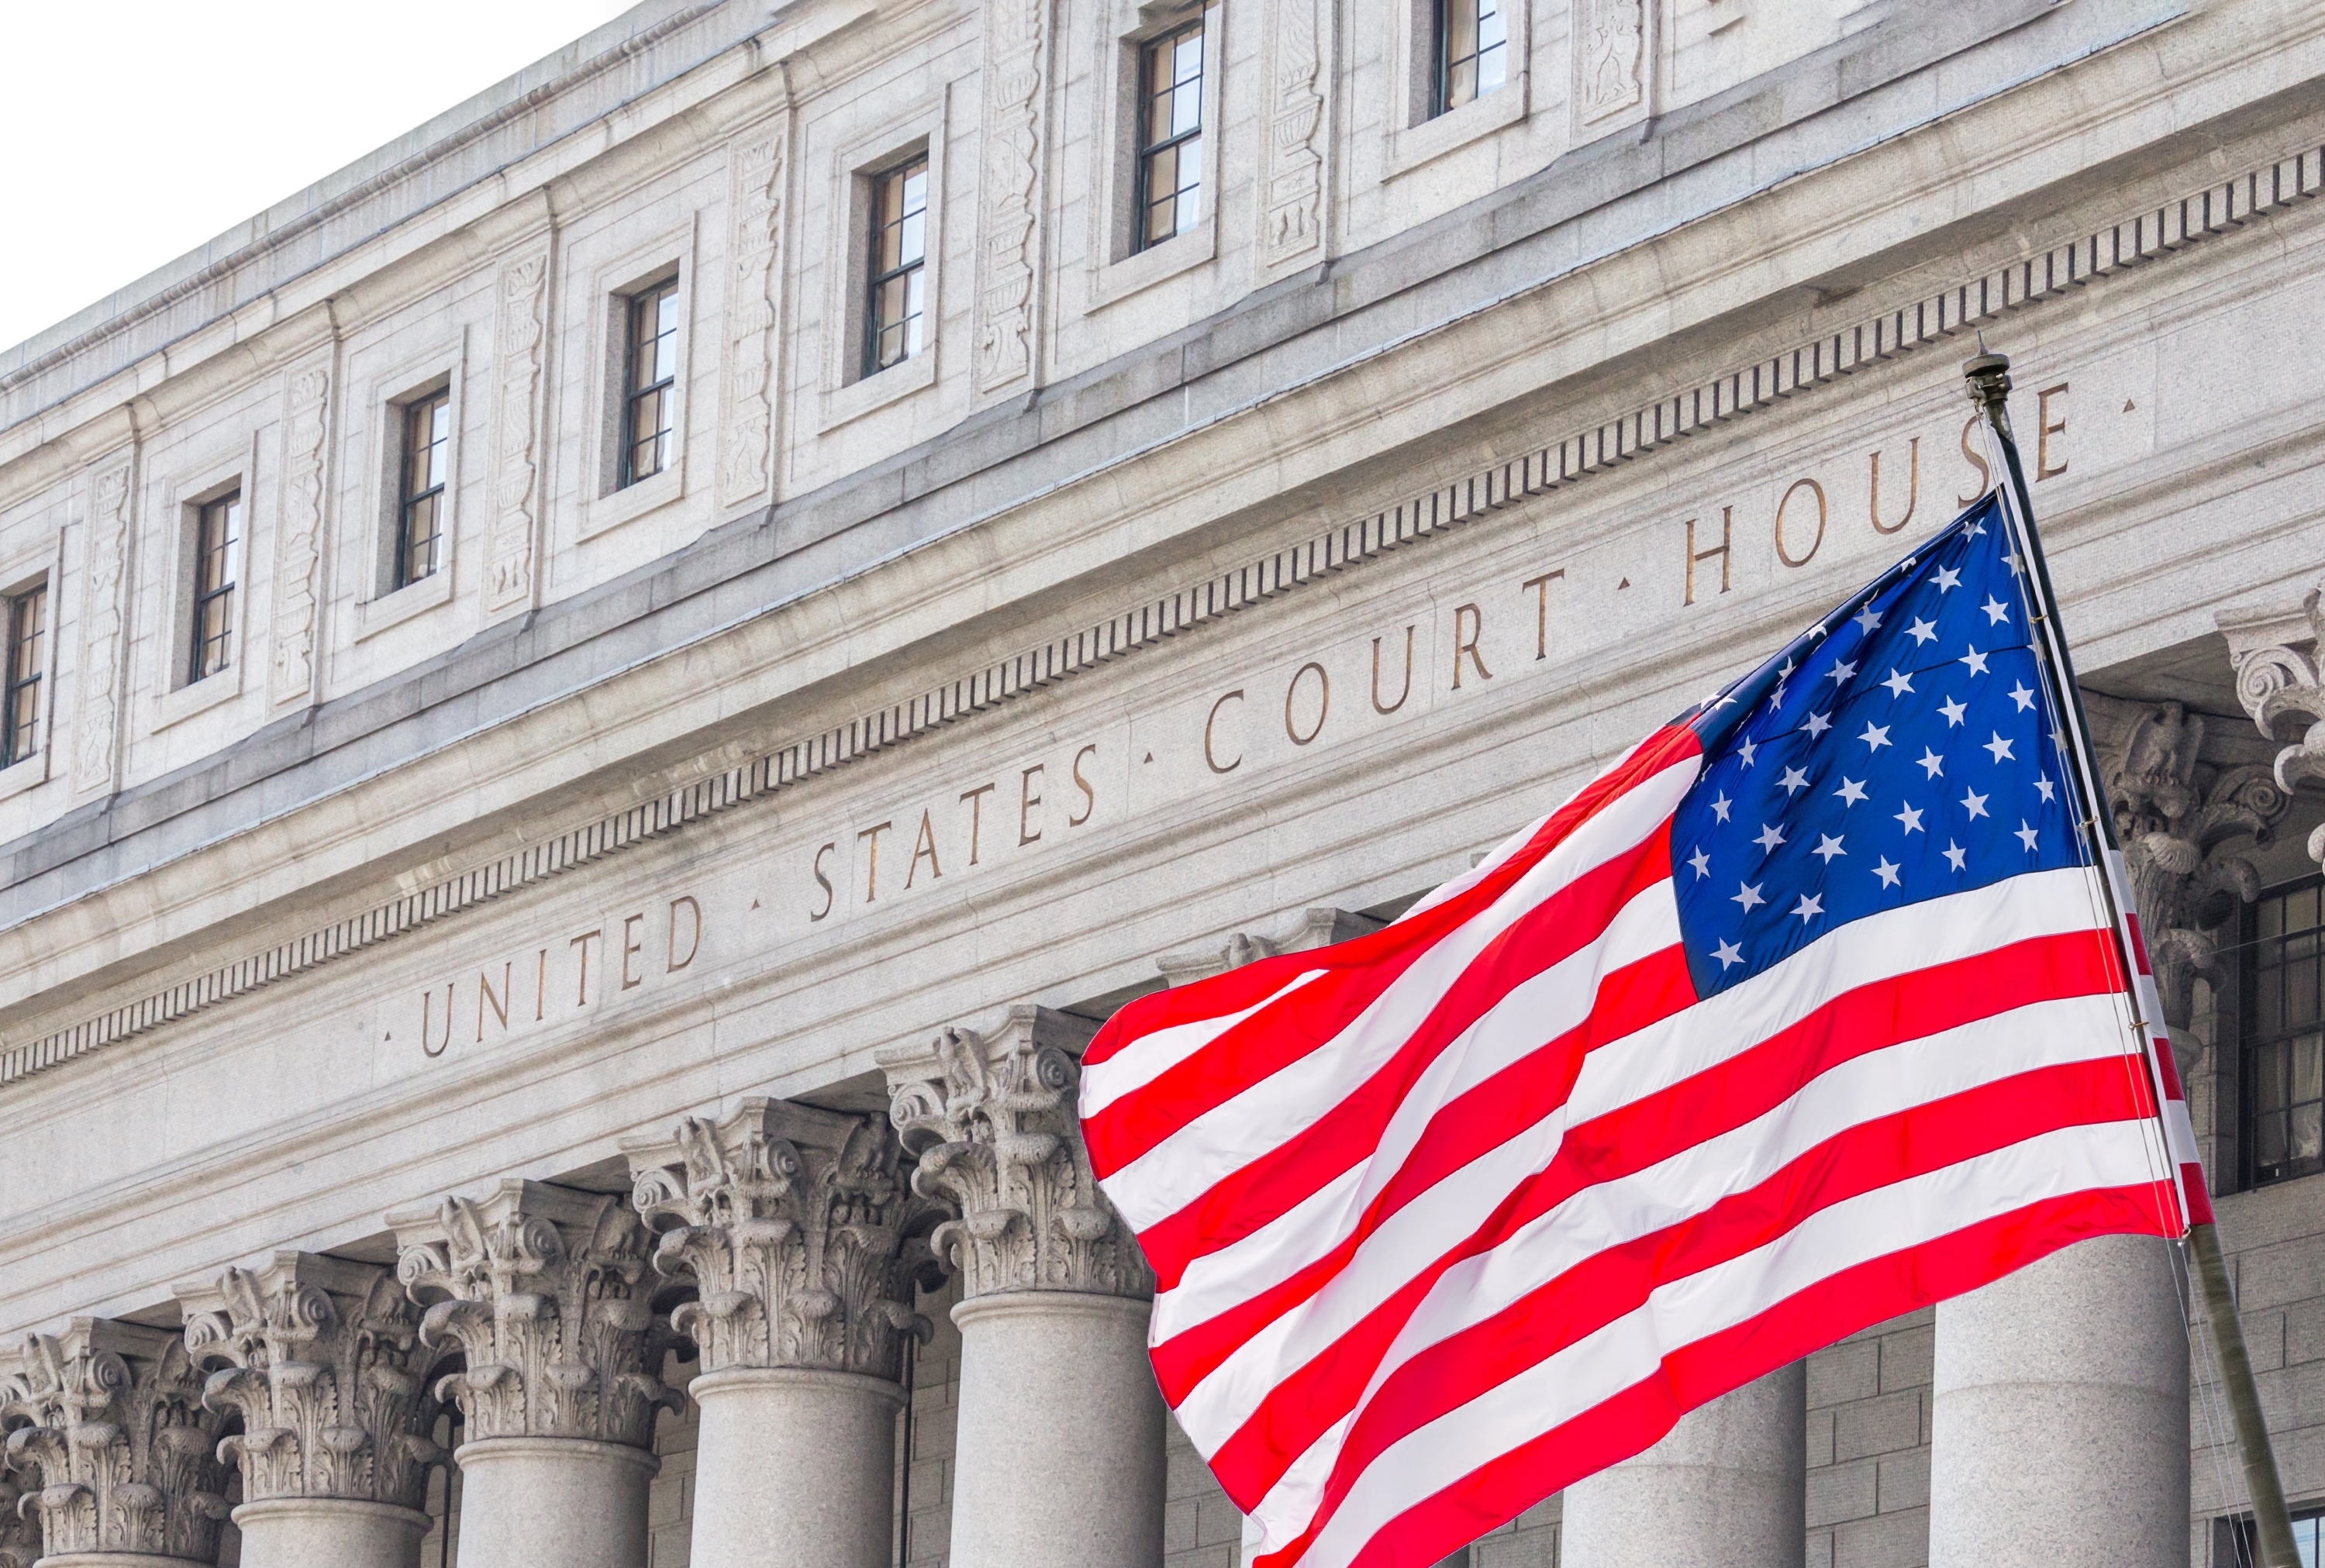 A courthouse with an American flag flying outside | Source: Shutterstock